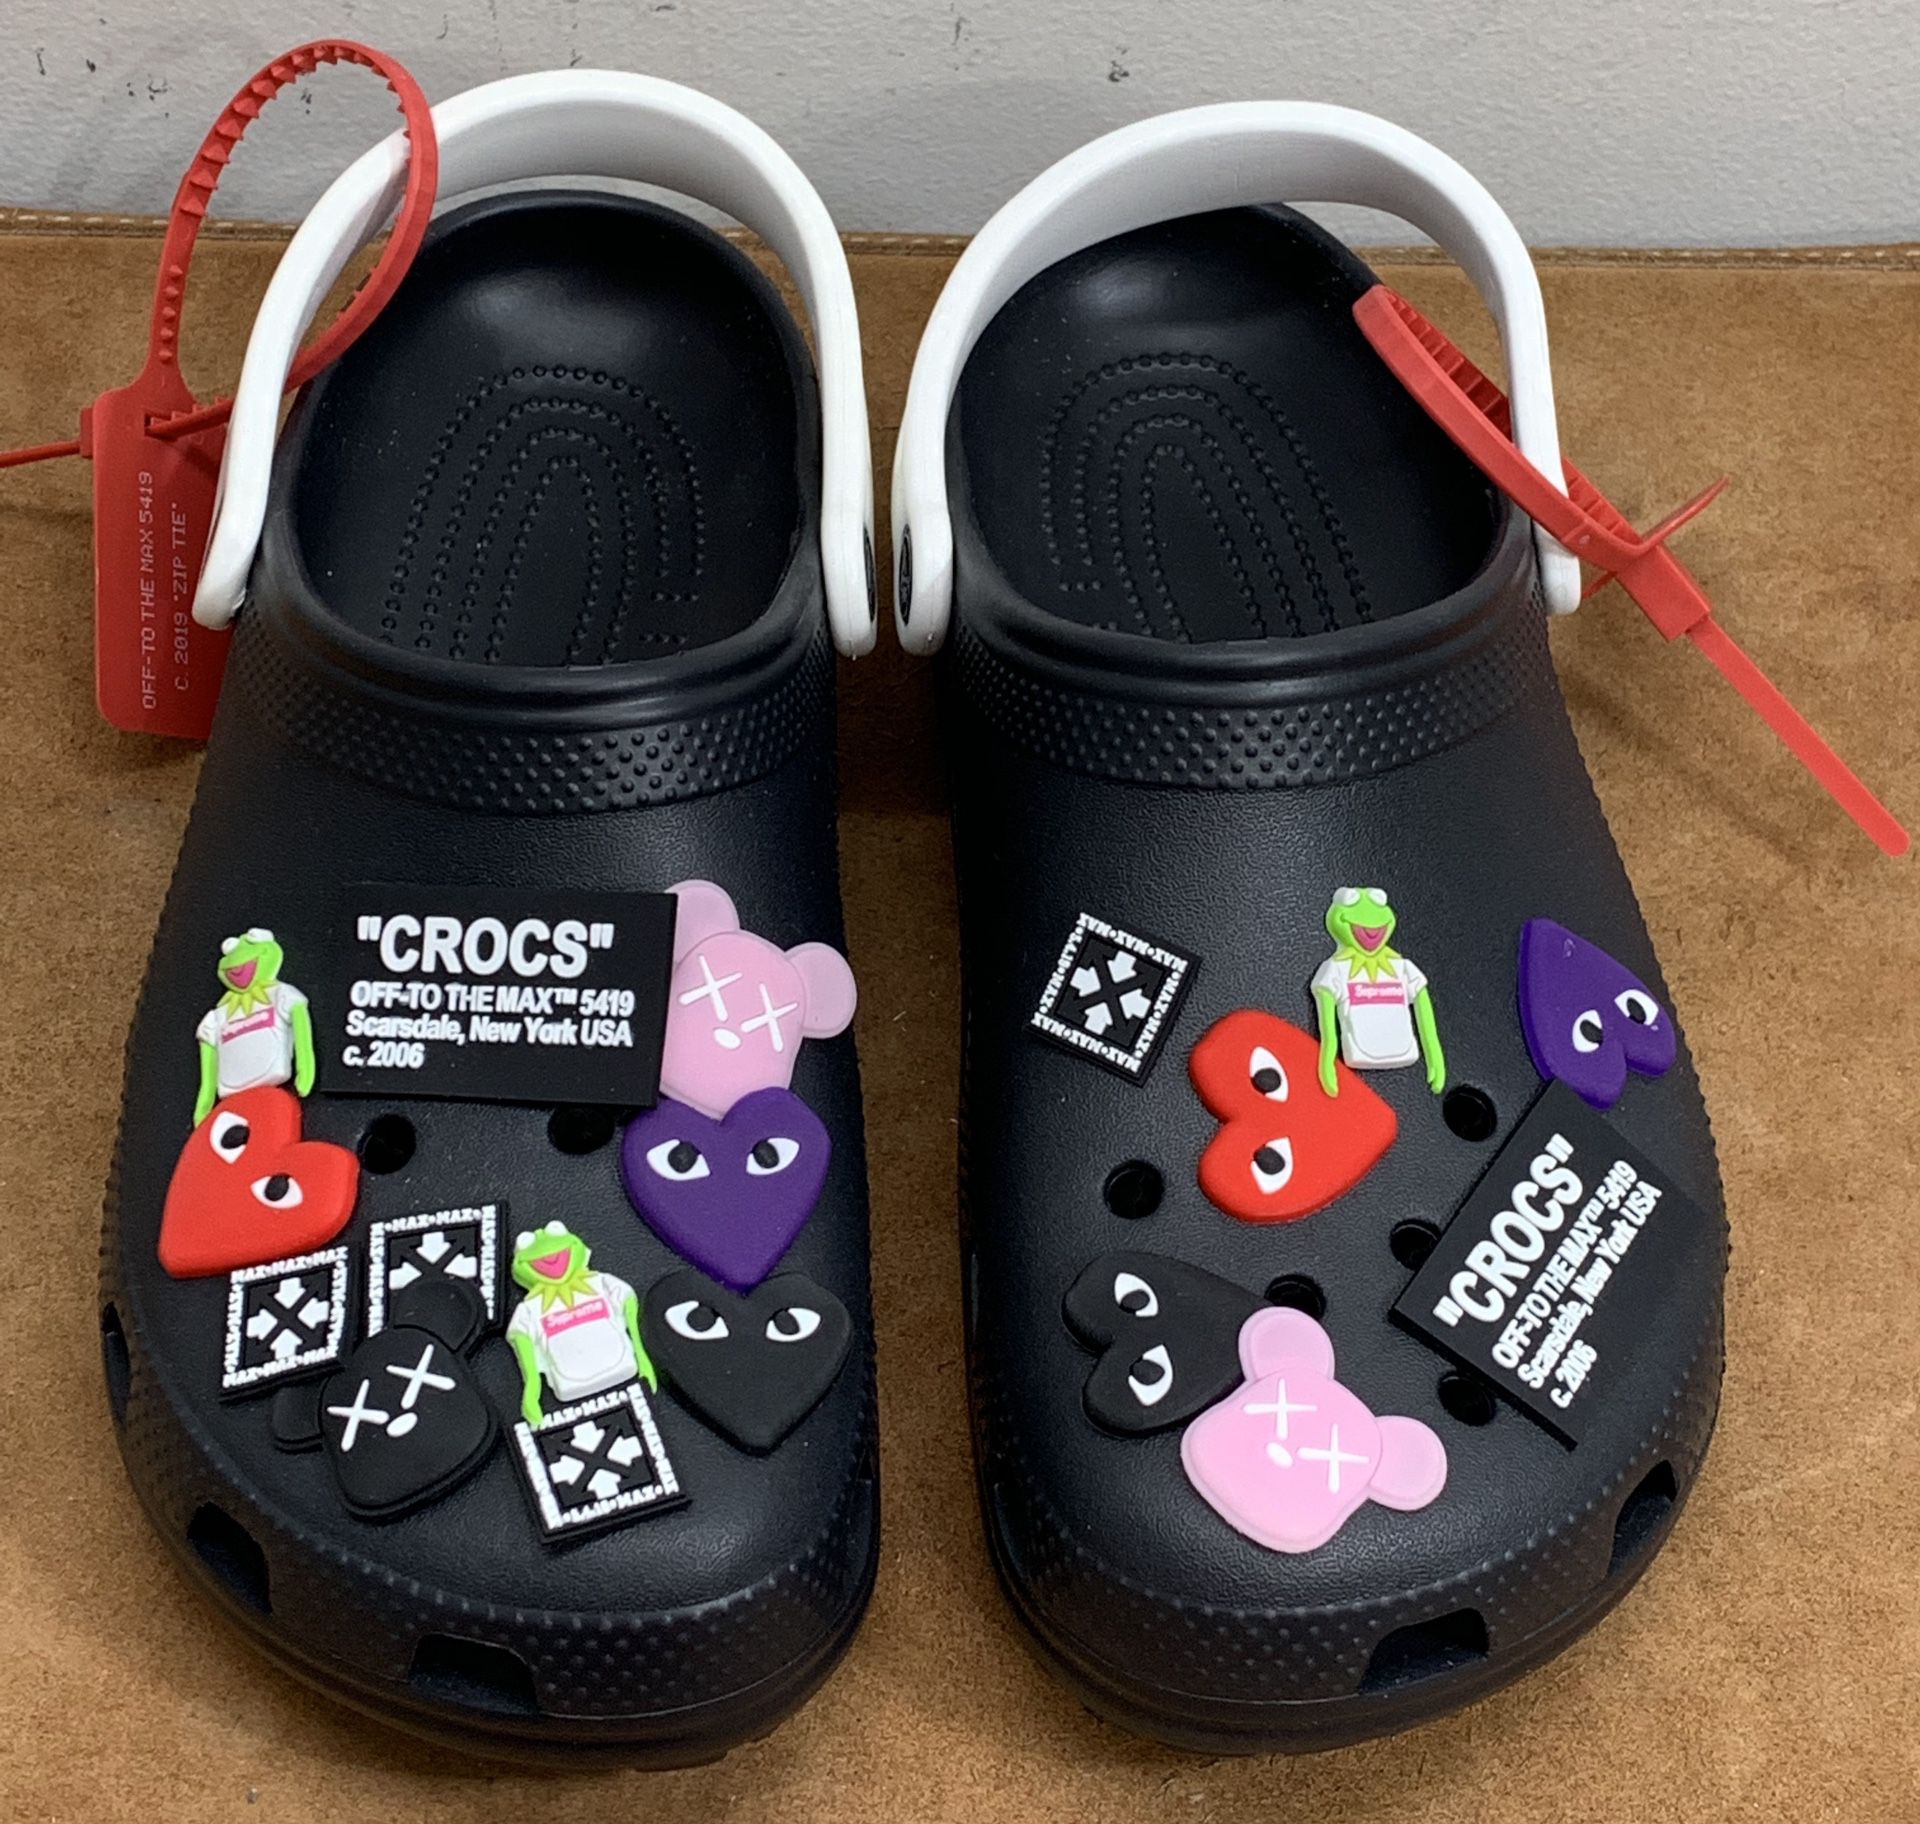 Finishing up 10 pairs of Louis Vuitton crocs this week🤧😮‍💨… One